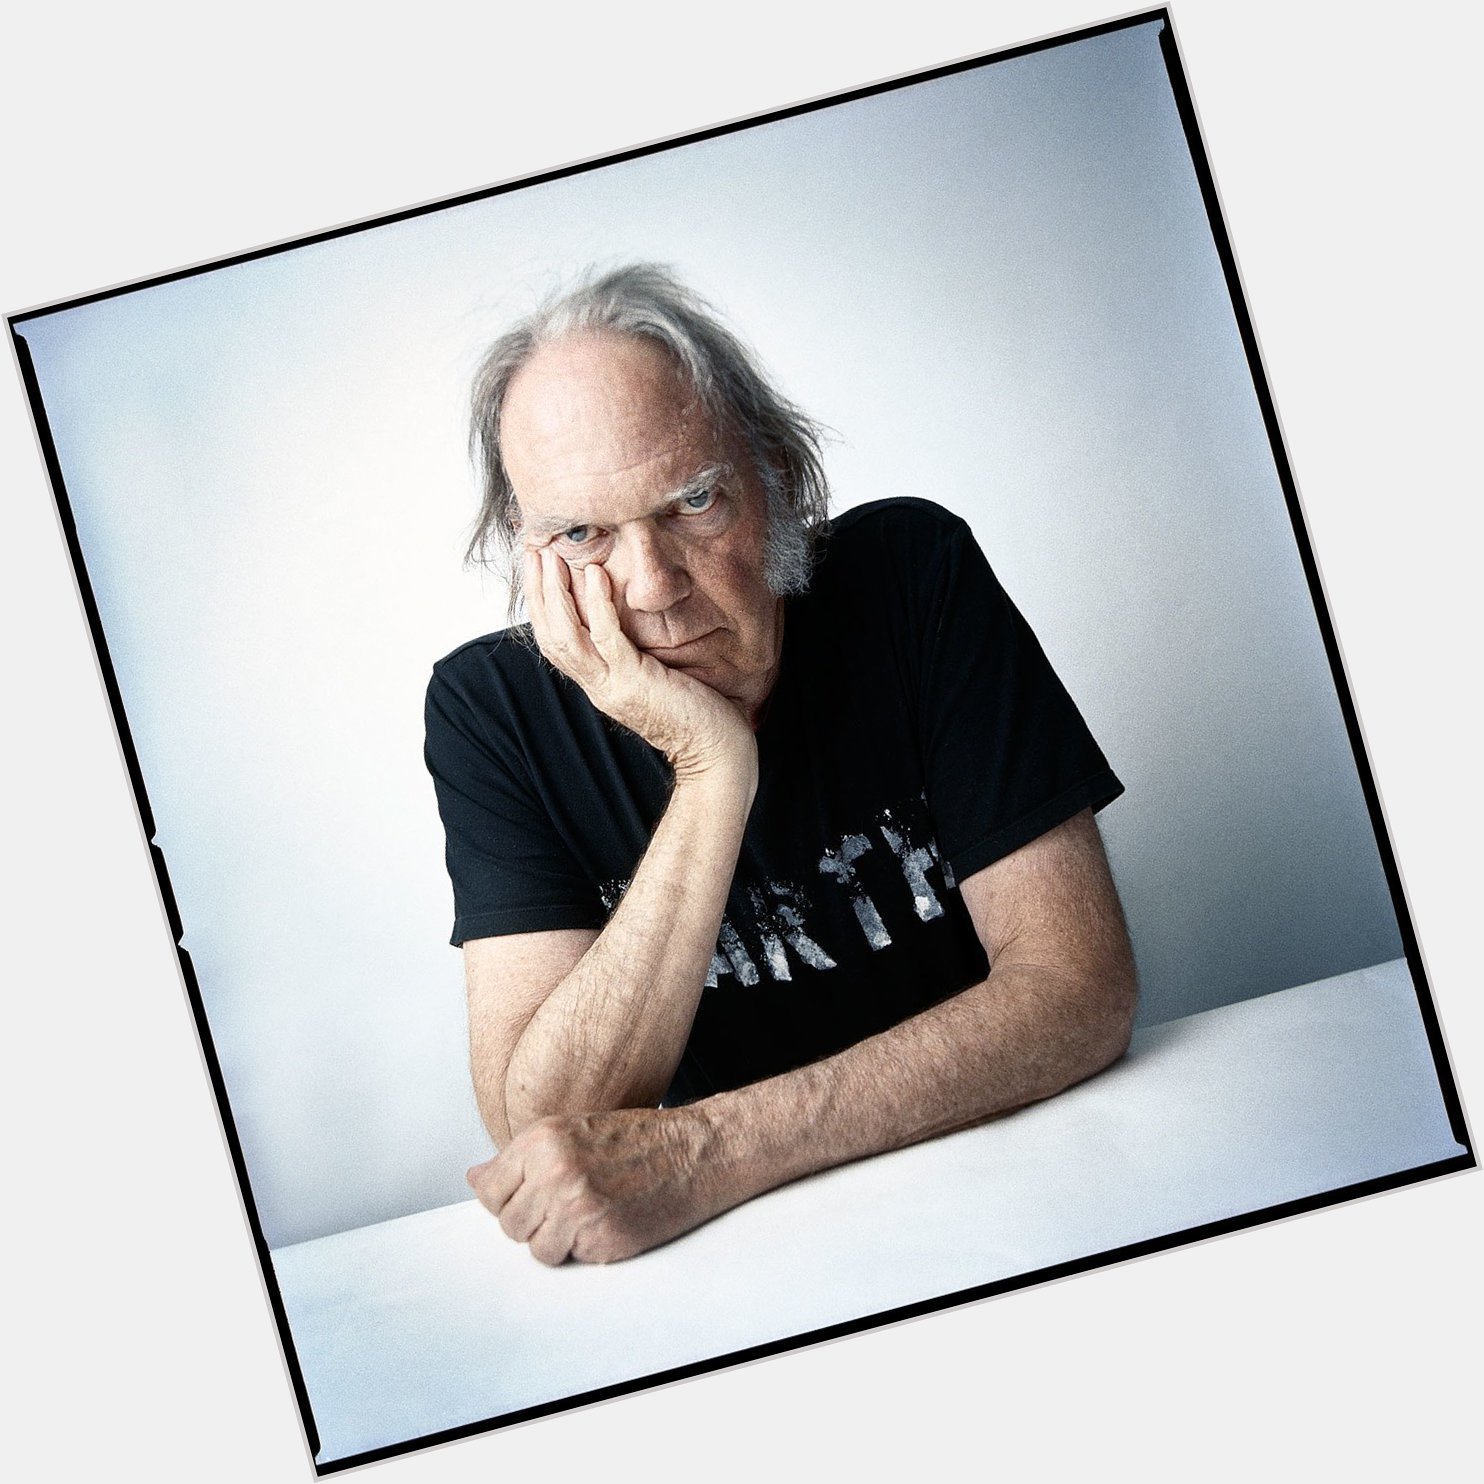 Happy Birthday Neil Young! The genius musician is 74 today. : Christopher Wahl 